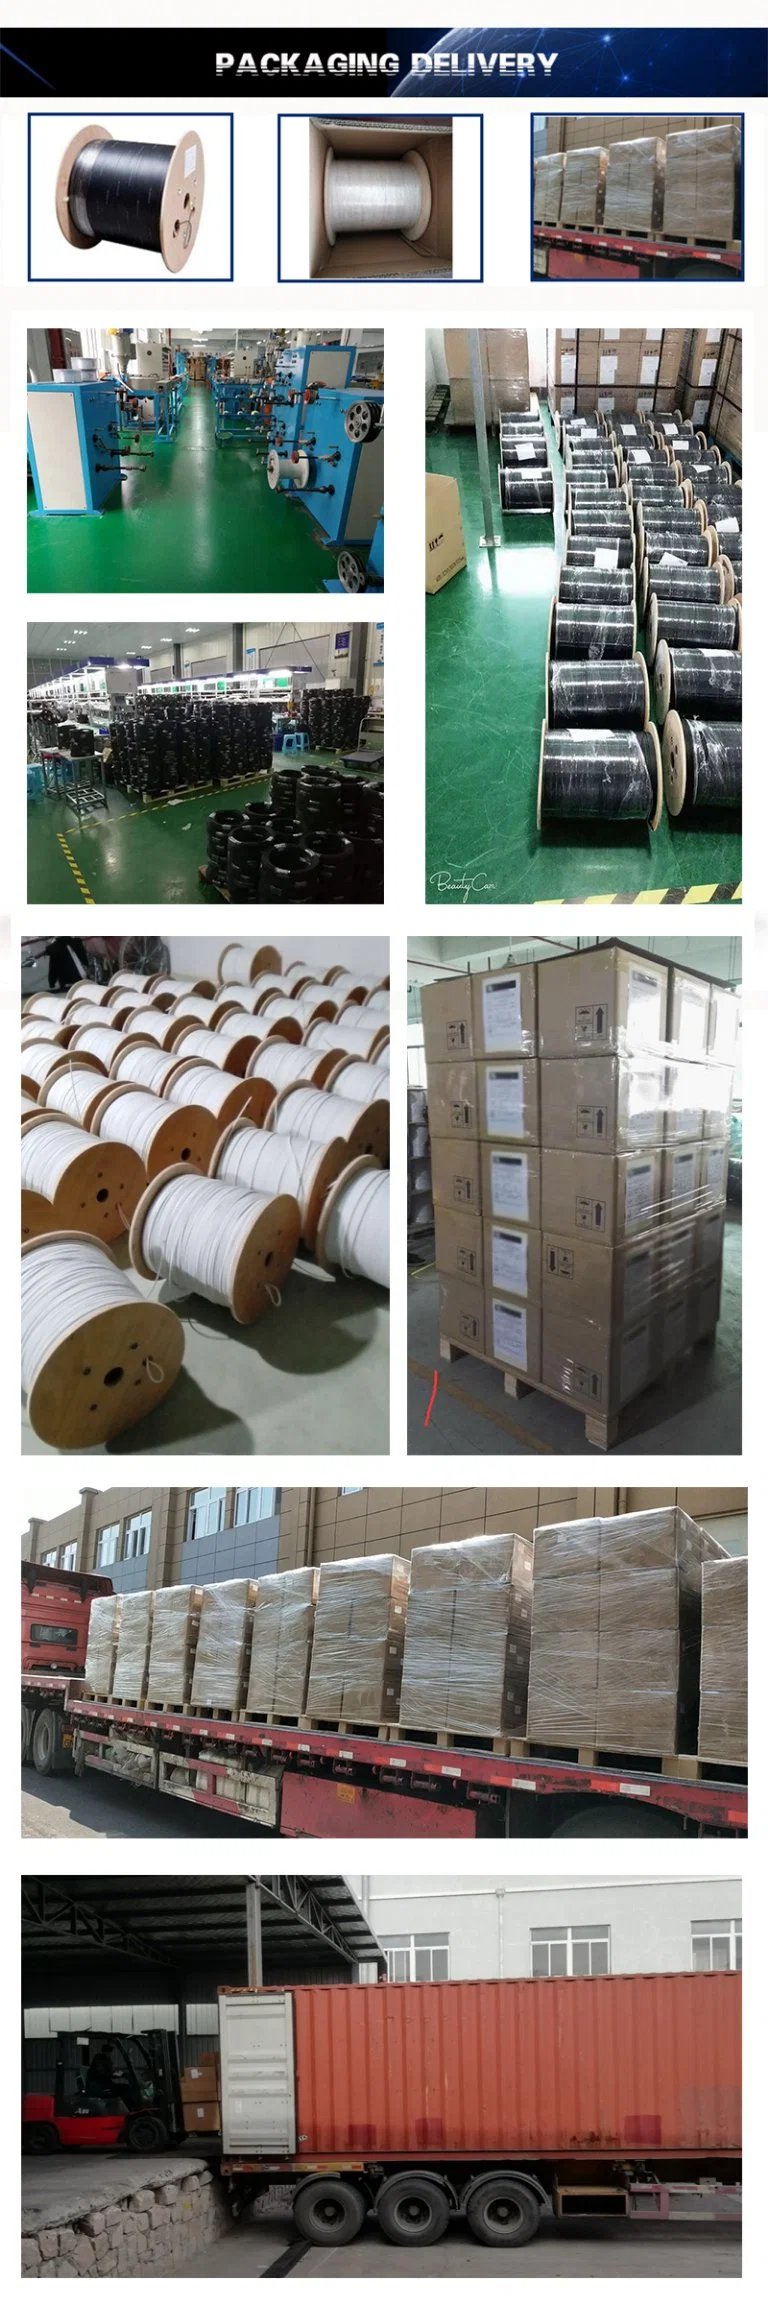 2000m/Roll 1000m/Drum 2 Cores 3 Steel Wire Outdoor G657A FTTH Fiber Optic Drop Wire Cable LSZH Sheath G652D FTTH Fiber Optic Cable